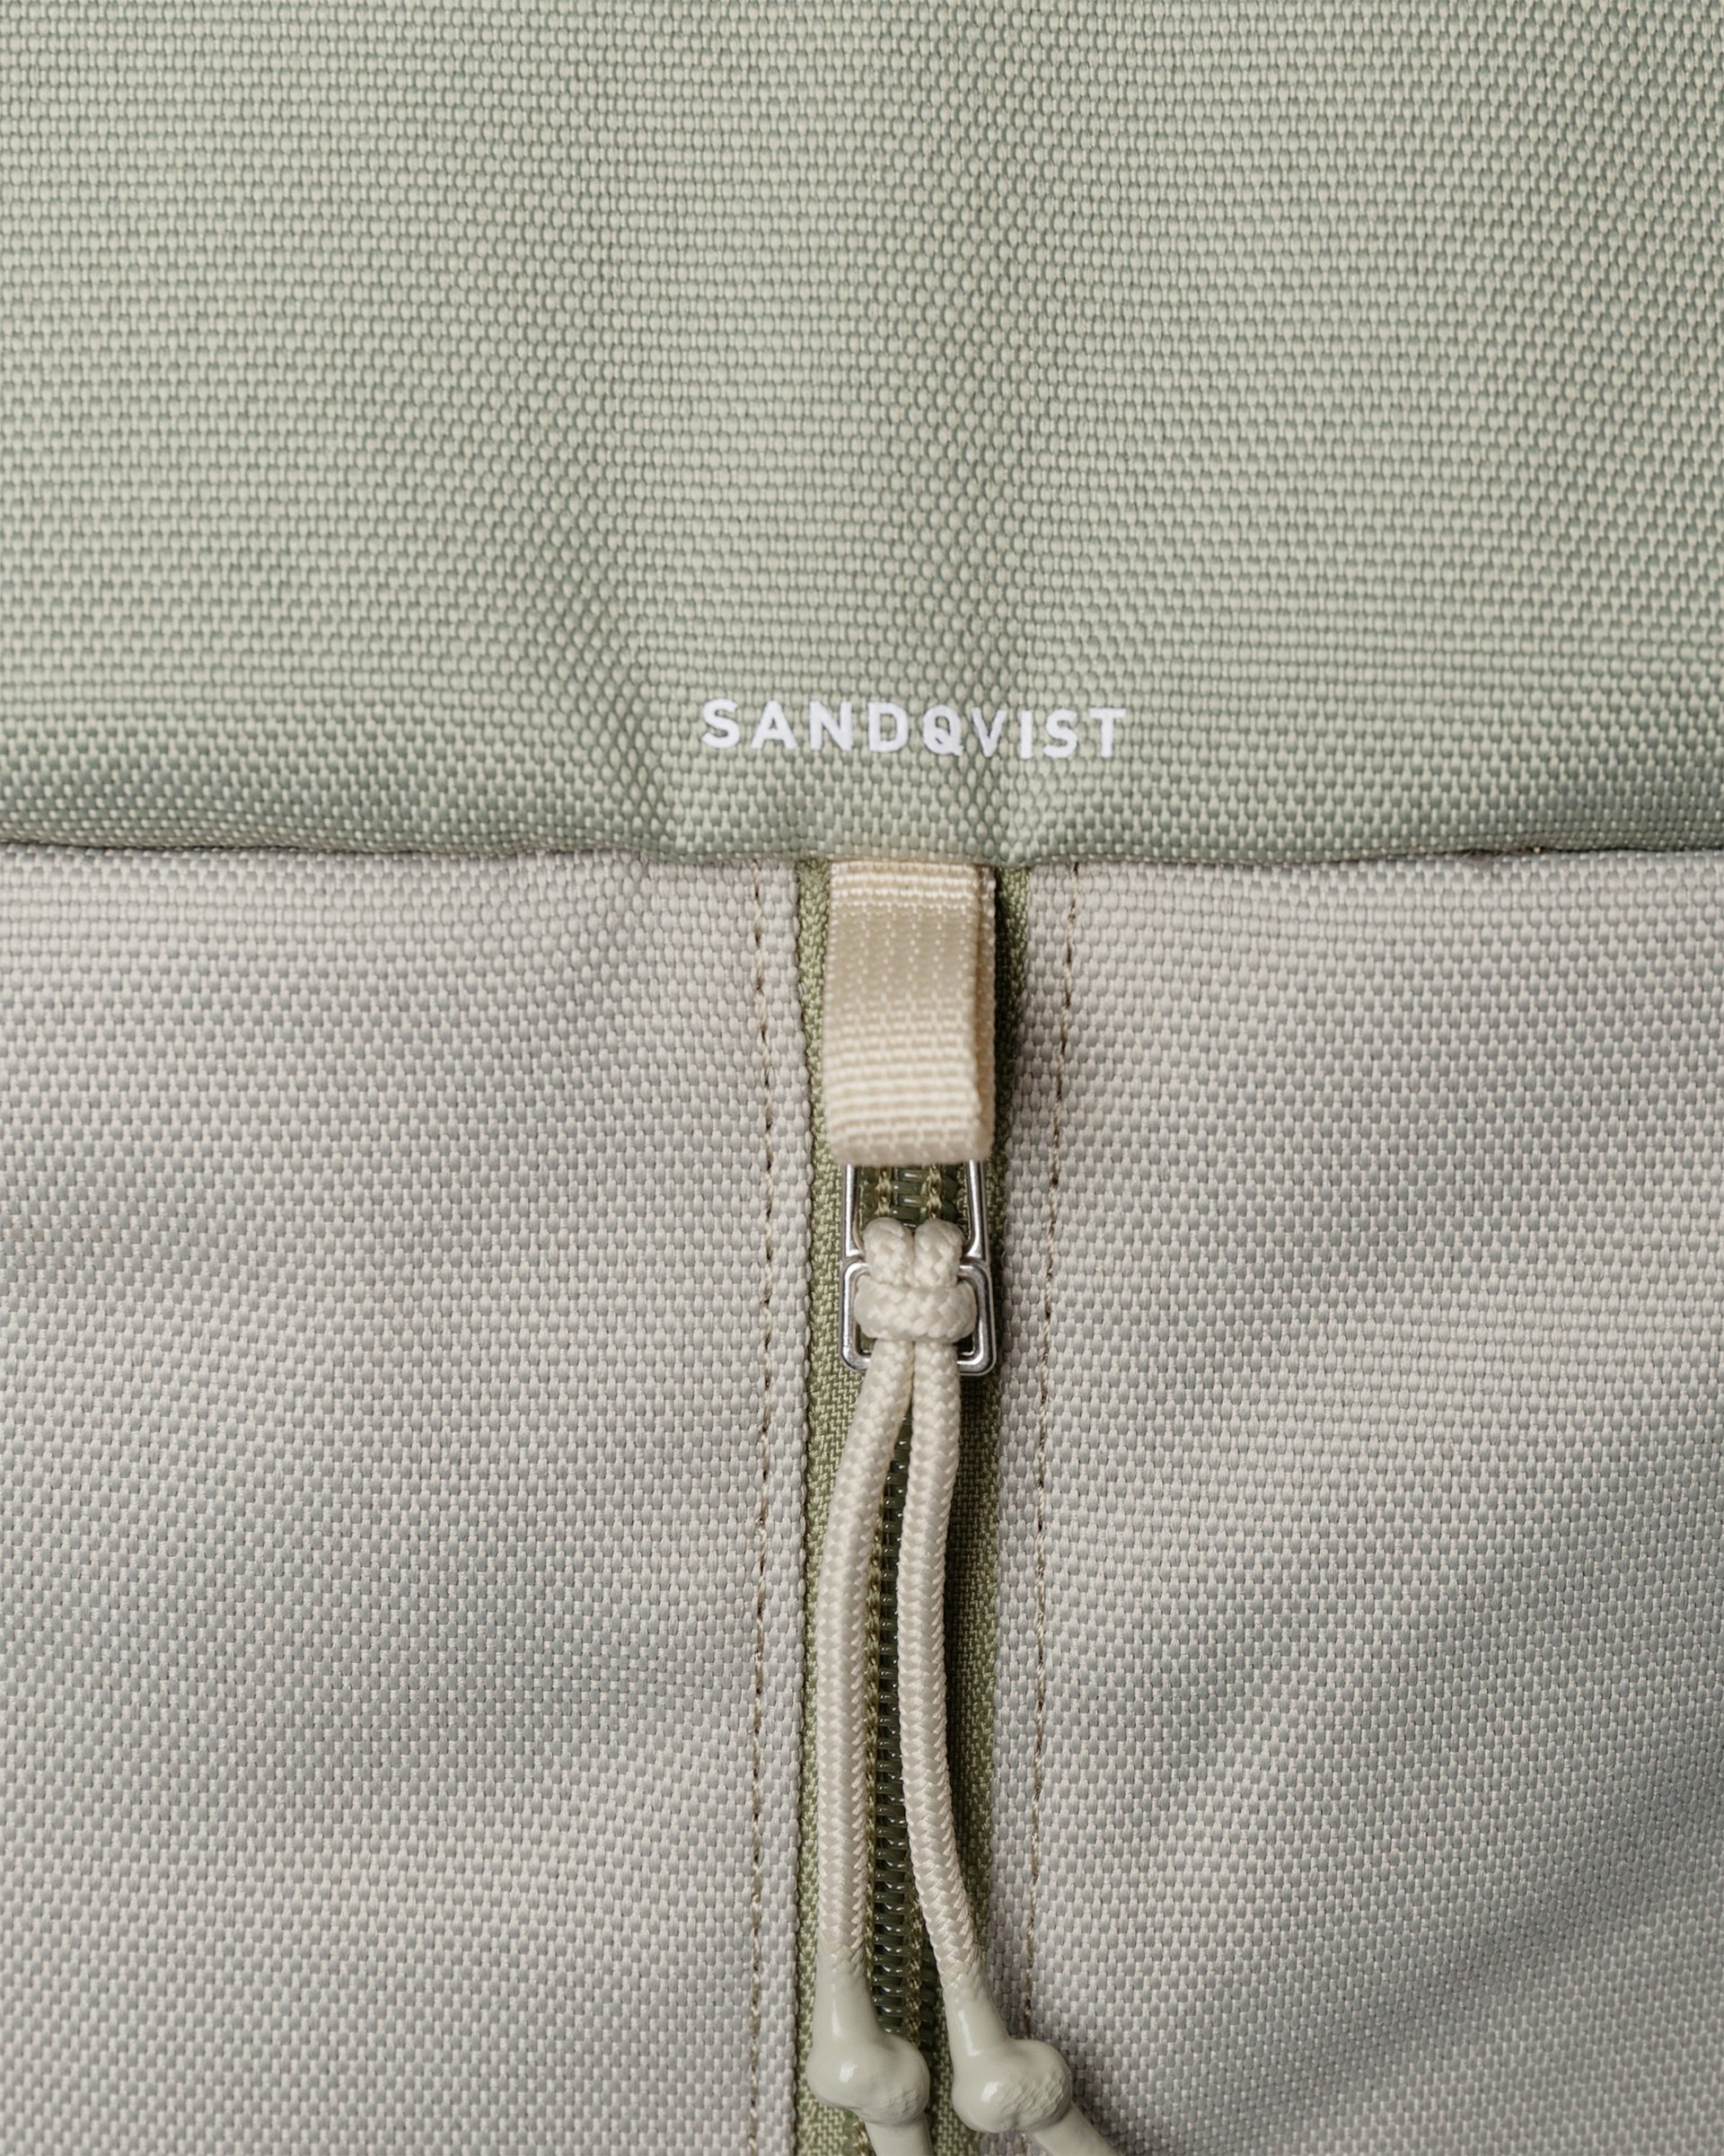 Sune belongs to the category Backpacks and is in color pale birch light & pale birch dark (2 of 7)